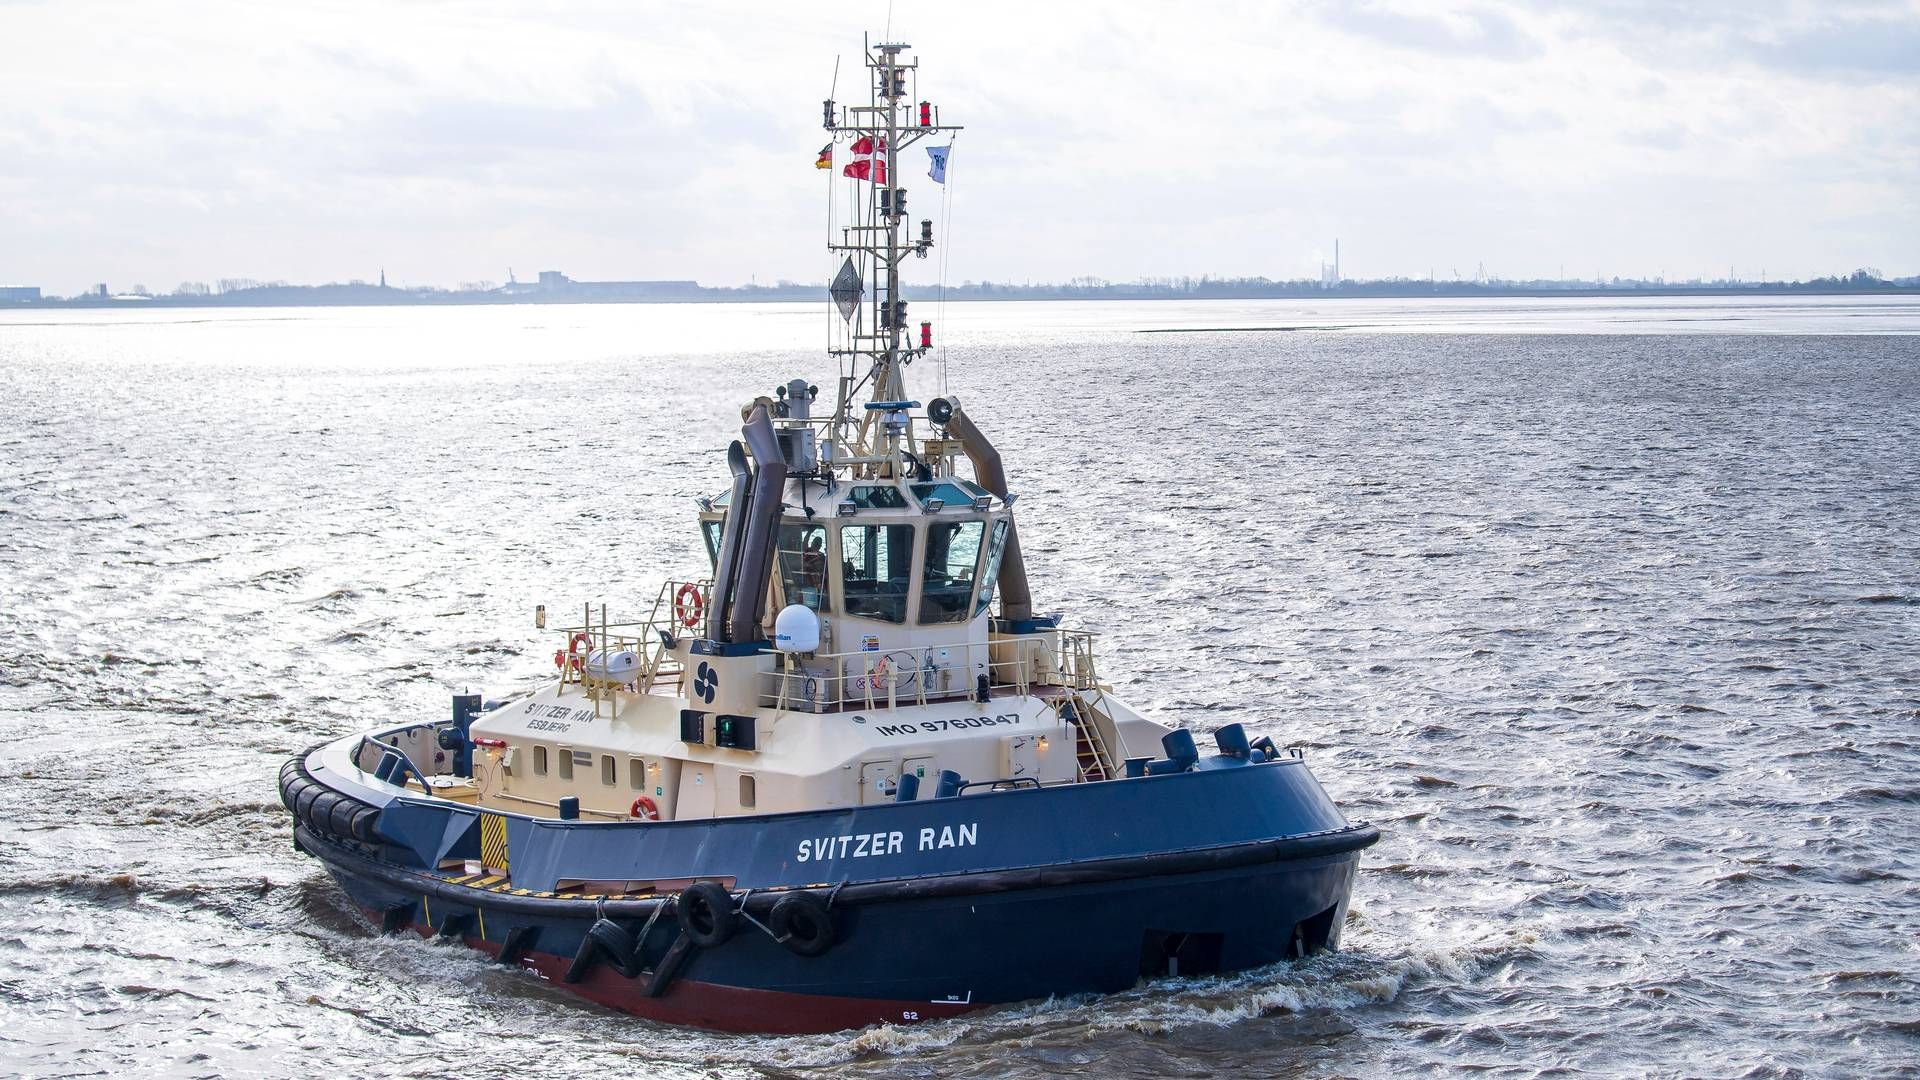 Sydbank estimates that Svitzer represents 5 to 6% of Maersk's market capitalization, which is approximately DKK 170bn. As a stand-alone company, Svitzer could thus have a market capitalization of DKK 8.6 to 10.3bn.